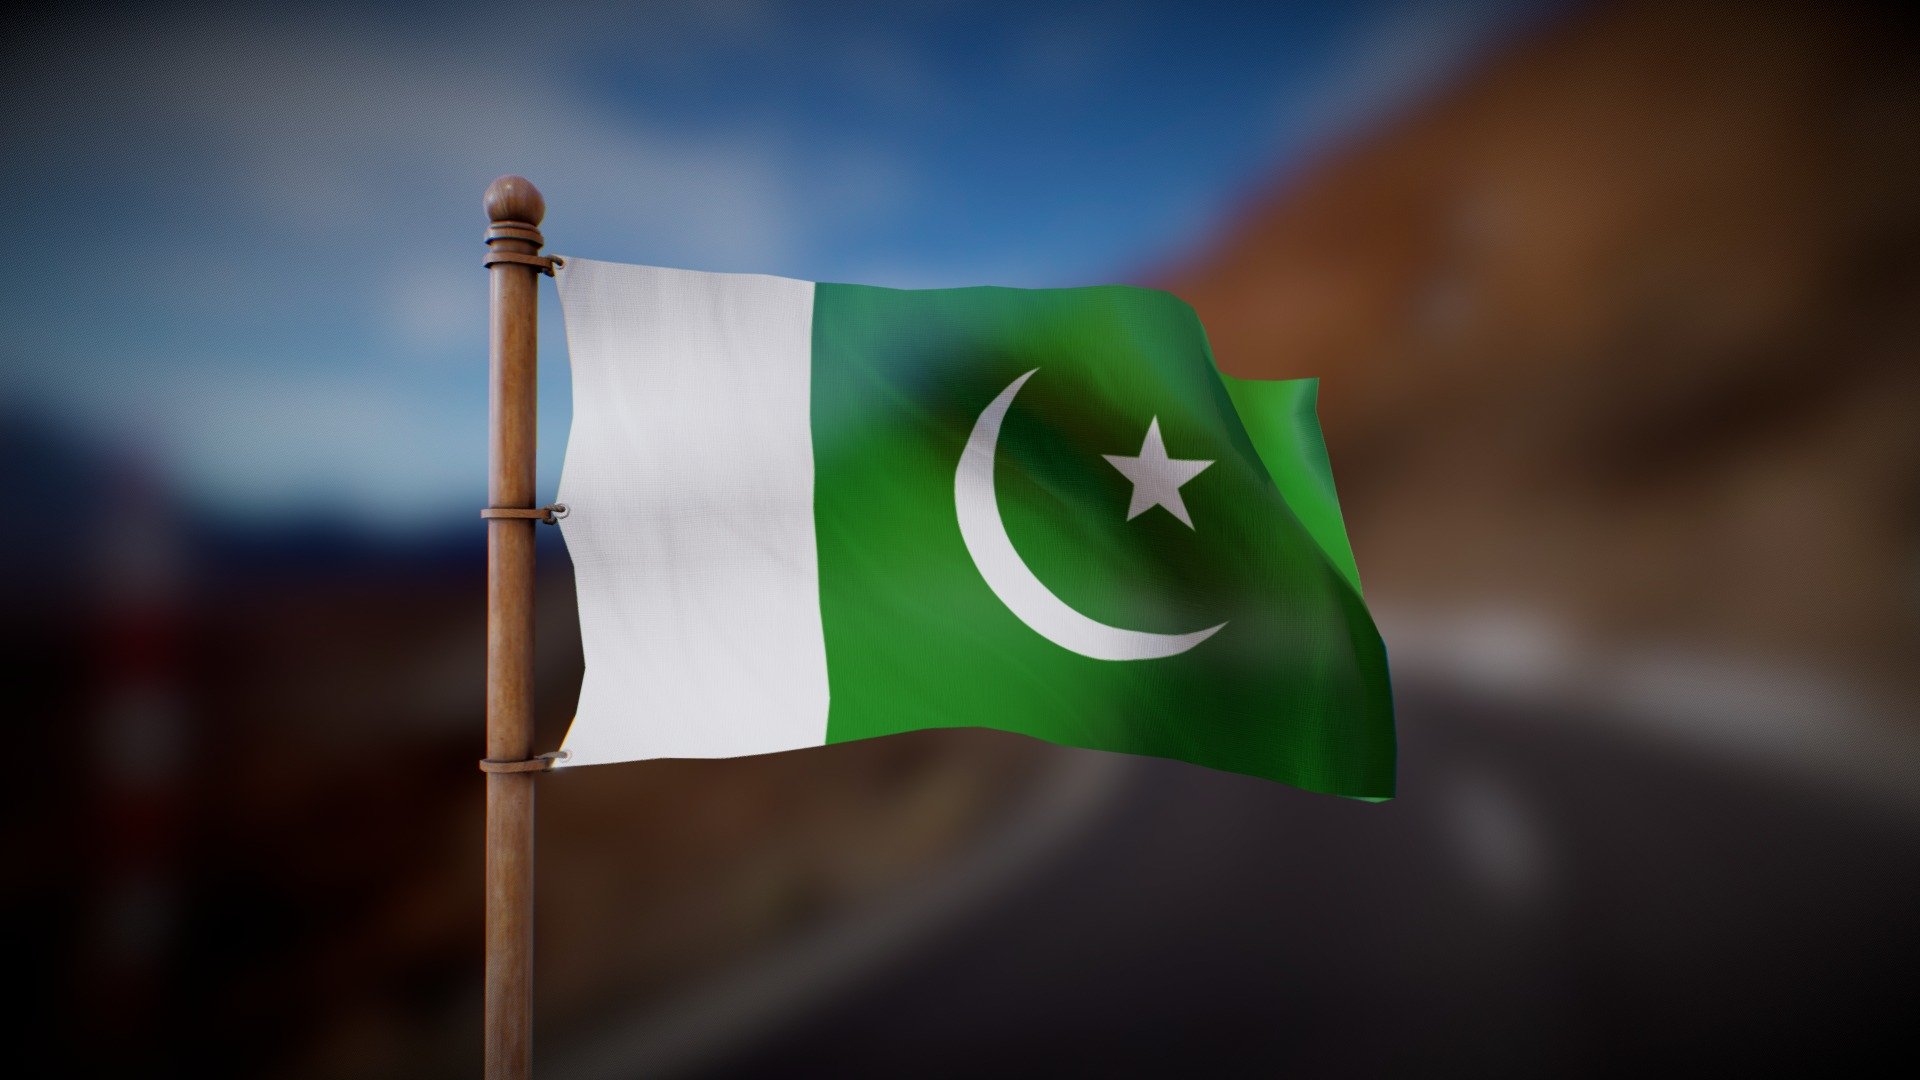 Flag waving in the wind in a looped animation

Joint Animation, perfect for any purpose
4K PBR textures

Feel free to DM me for anu question of custom requests :) - Flag of Pakistan - Wind Animated Loop - Buy Royalty Free 3D model by Deftroy 3d model